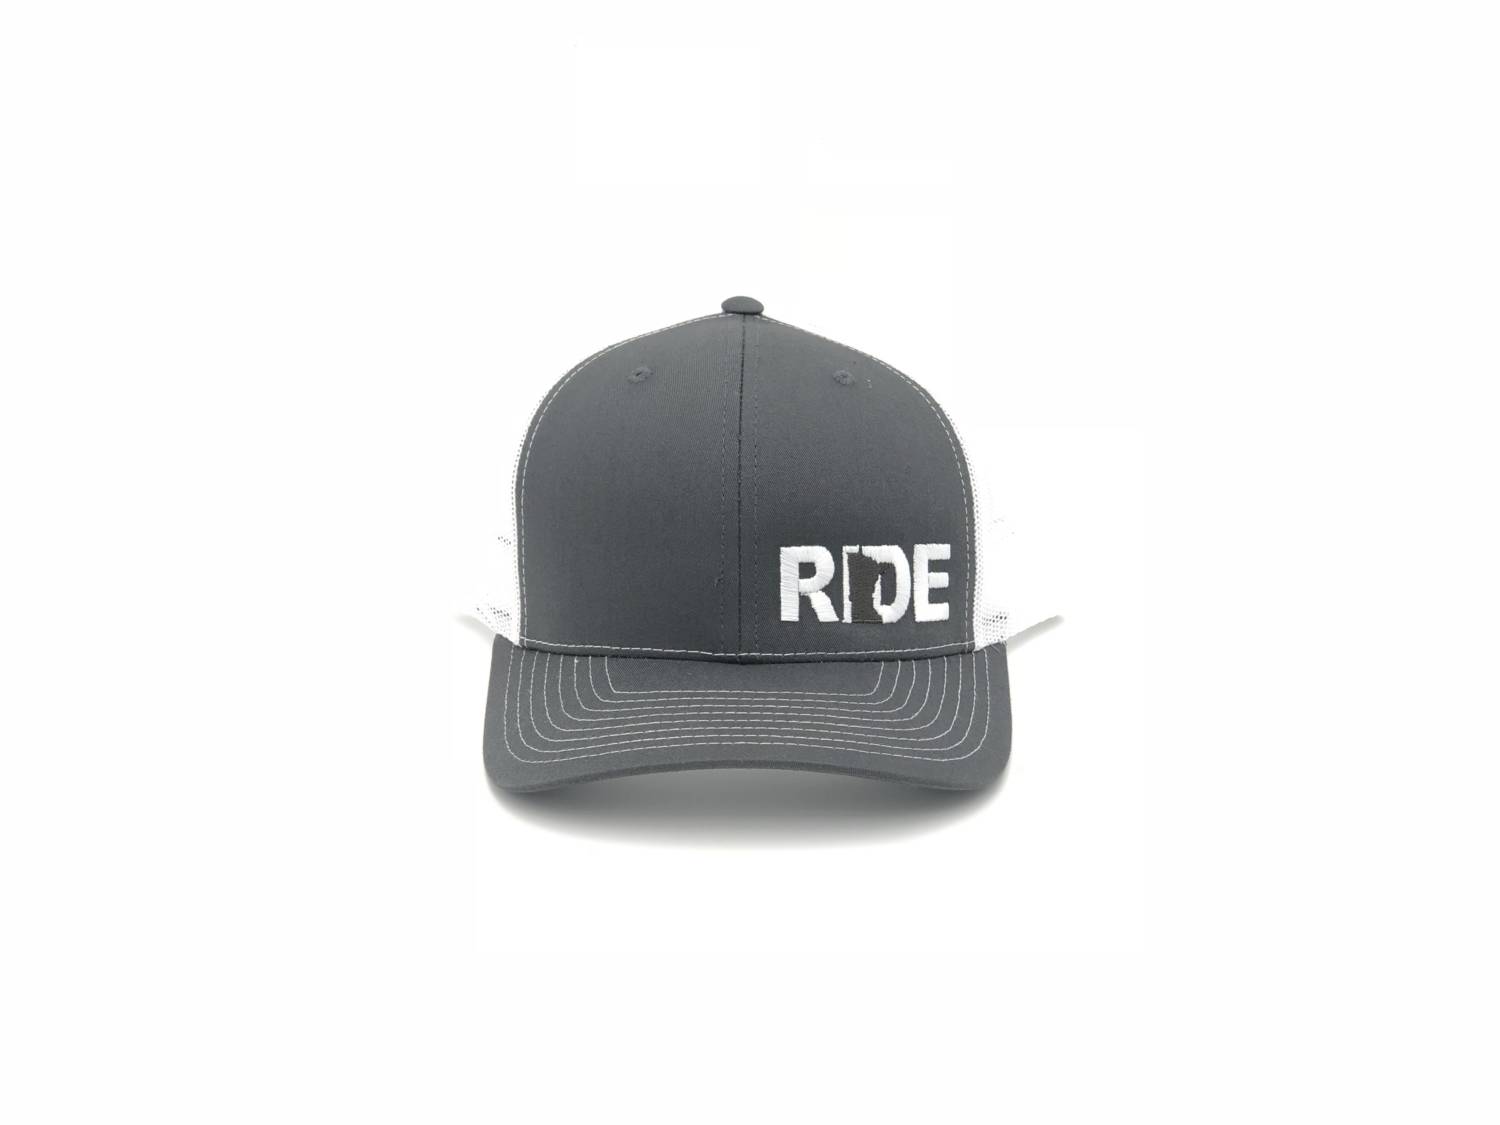 Ride Minnesota Classic Pro Night Out Embroidered Snapback Trucker Hat Gray/White